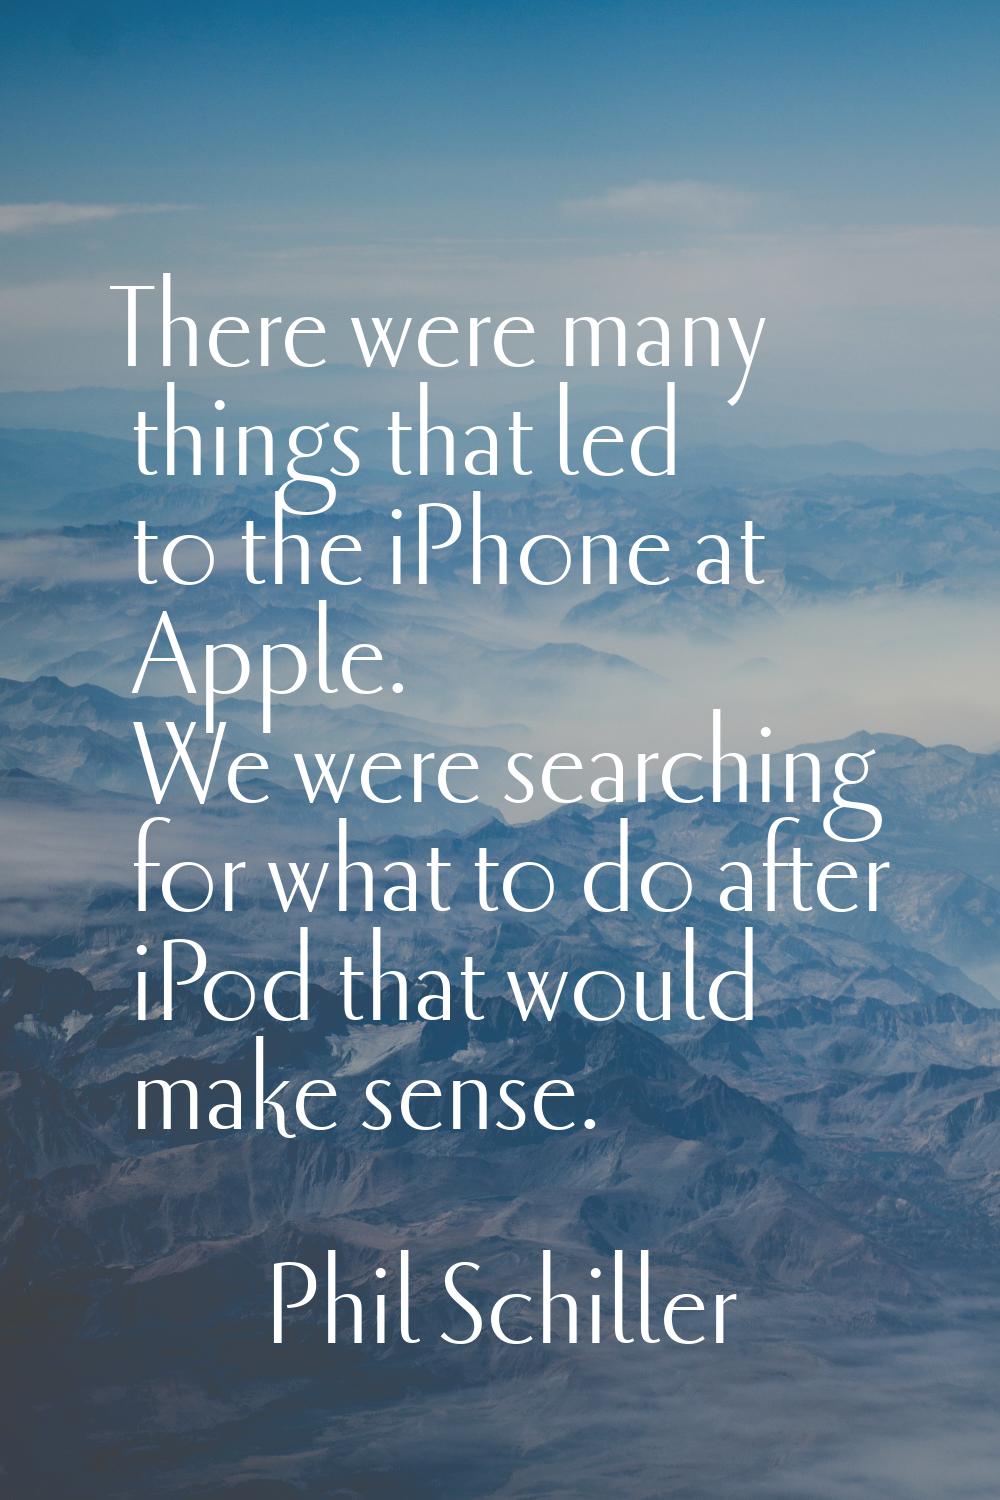 There were many things that led to the iPhone at Apple. We were searching for what to do after iPod